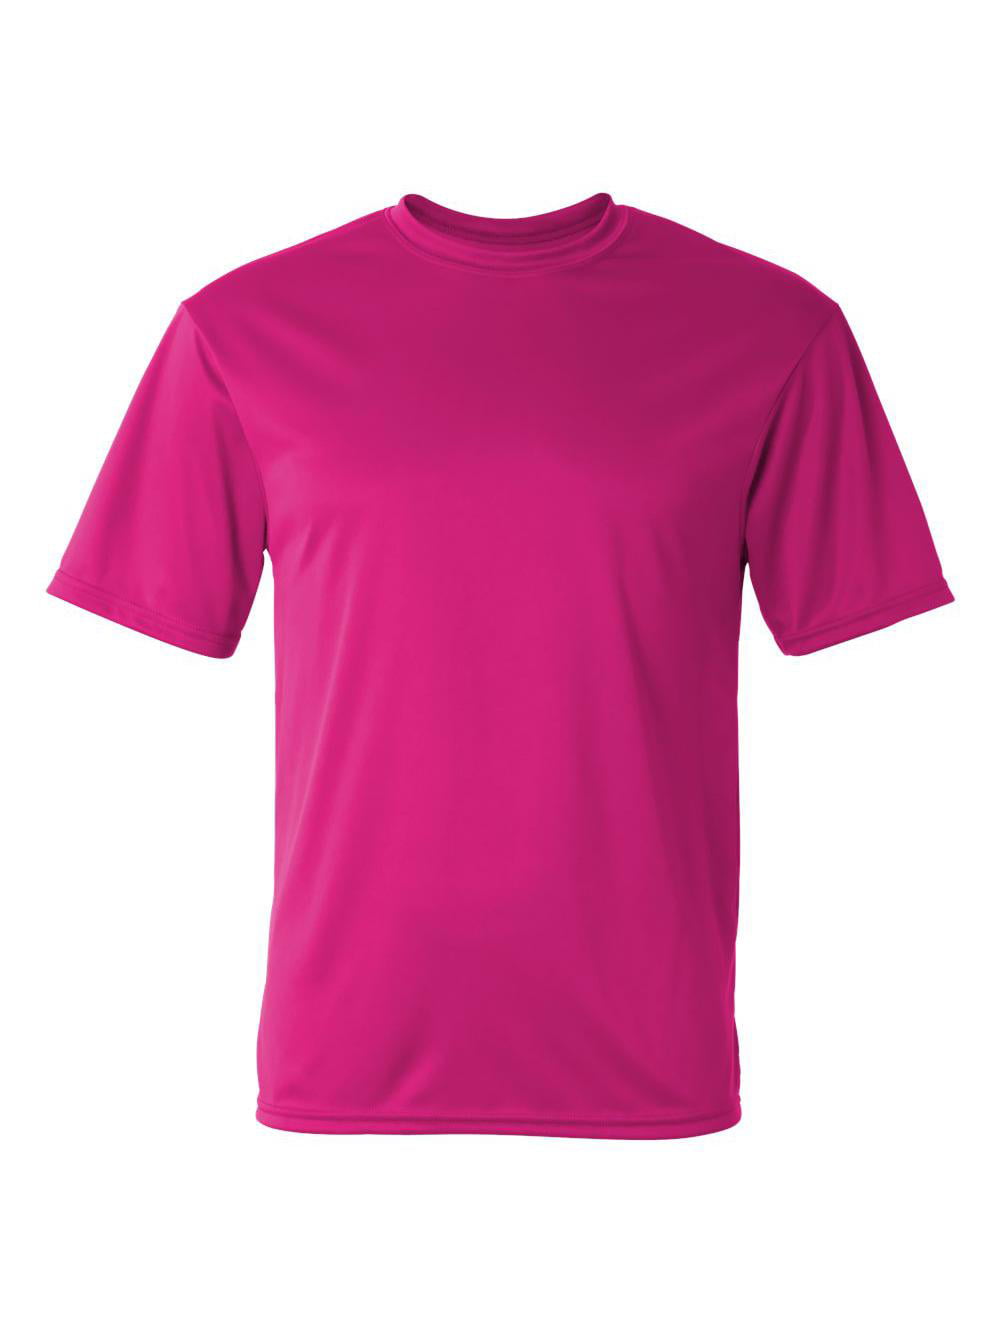 C2 Sport Performance T-Shirt in Hot Pink XL | 5100